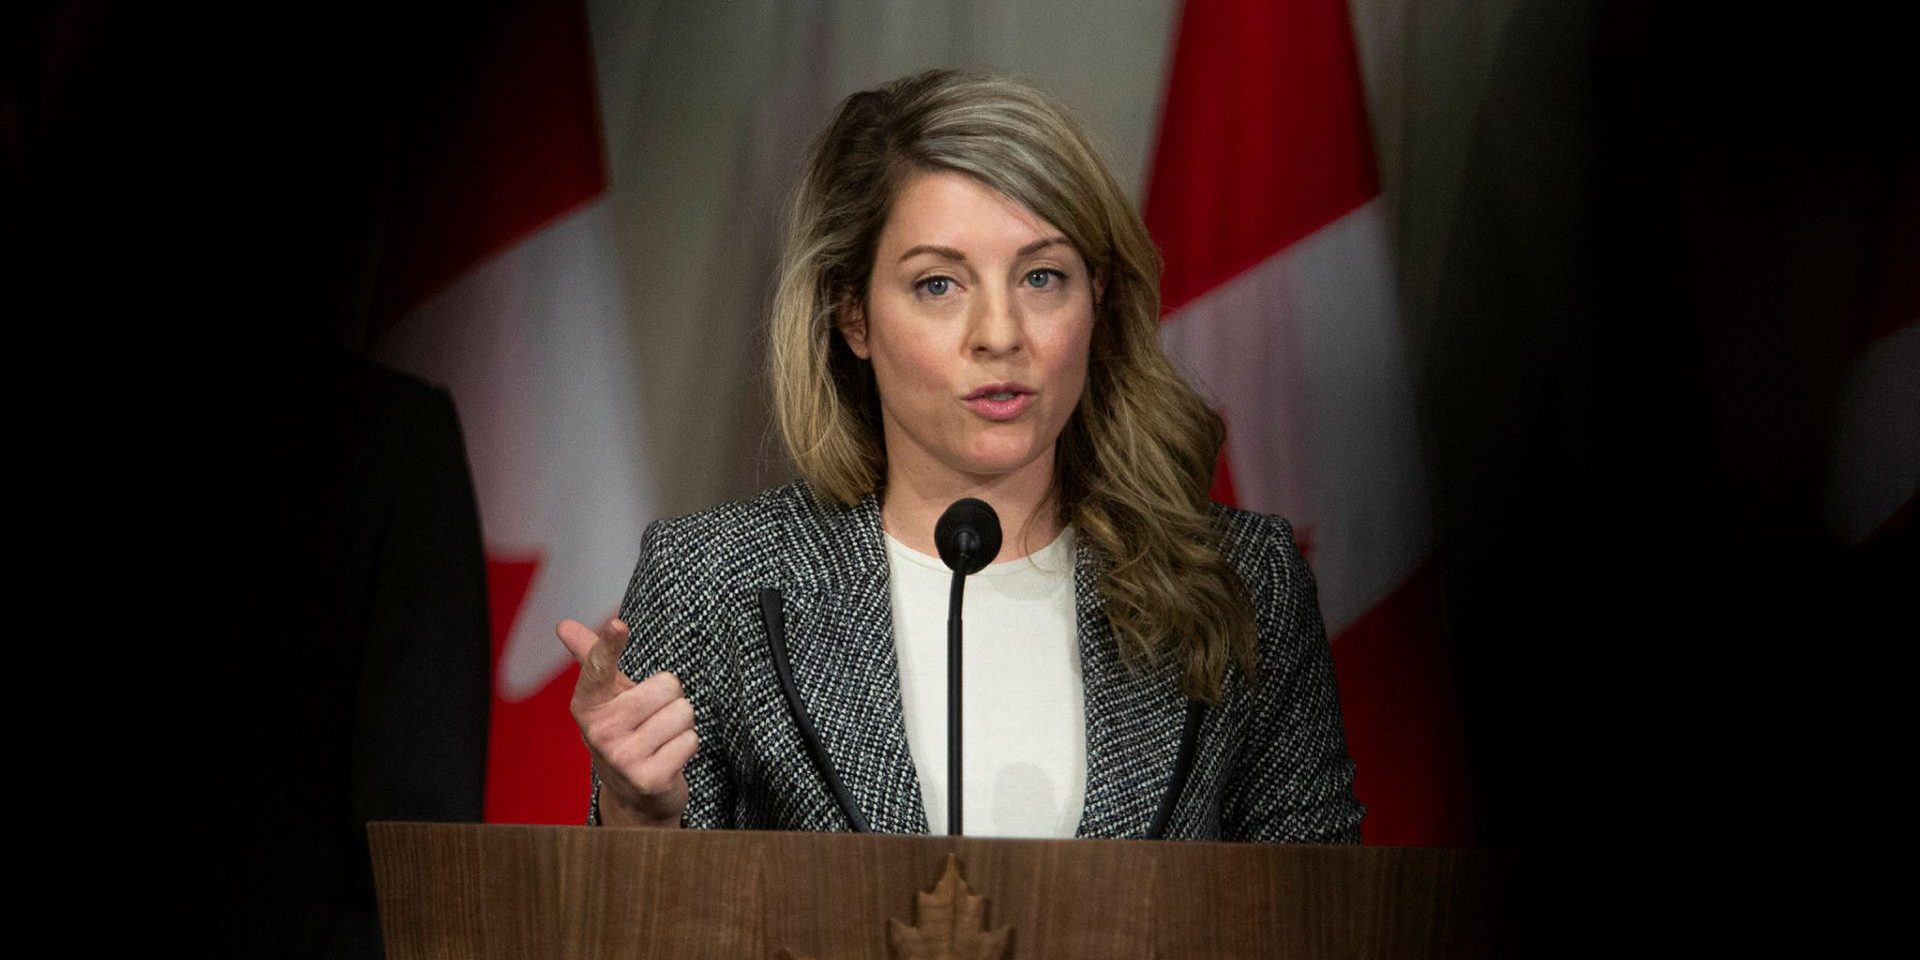 Minister of Foreign Affairs Mélanie Joly speaks during a press conference at the Sir John A. Macdonald building on Feb. 22, 2022 to provide an update on the government’s response to Russian aggression in eastern Ukraine. The Hill Times photograph by Andrew Meade